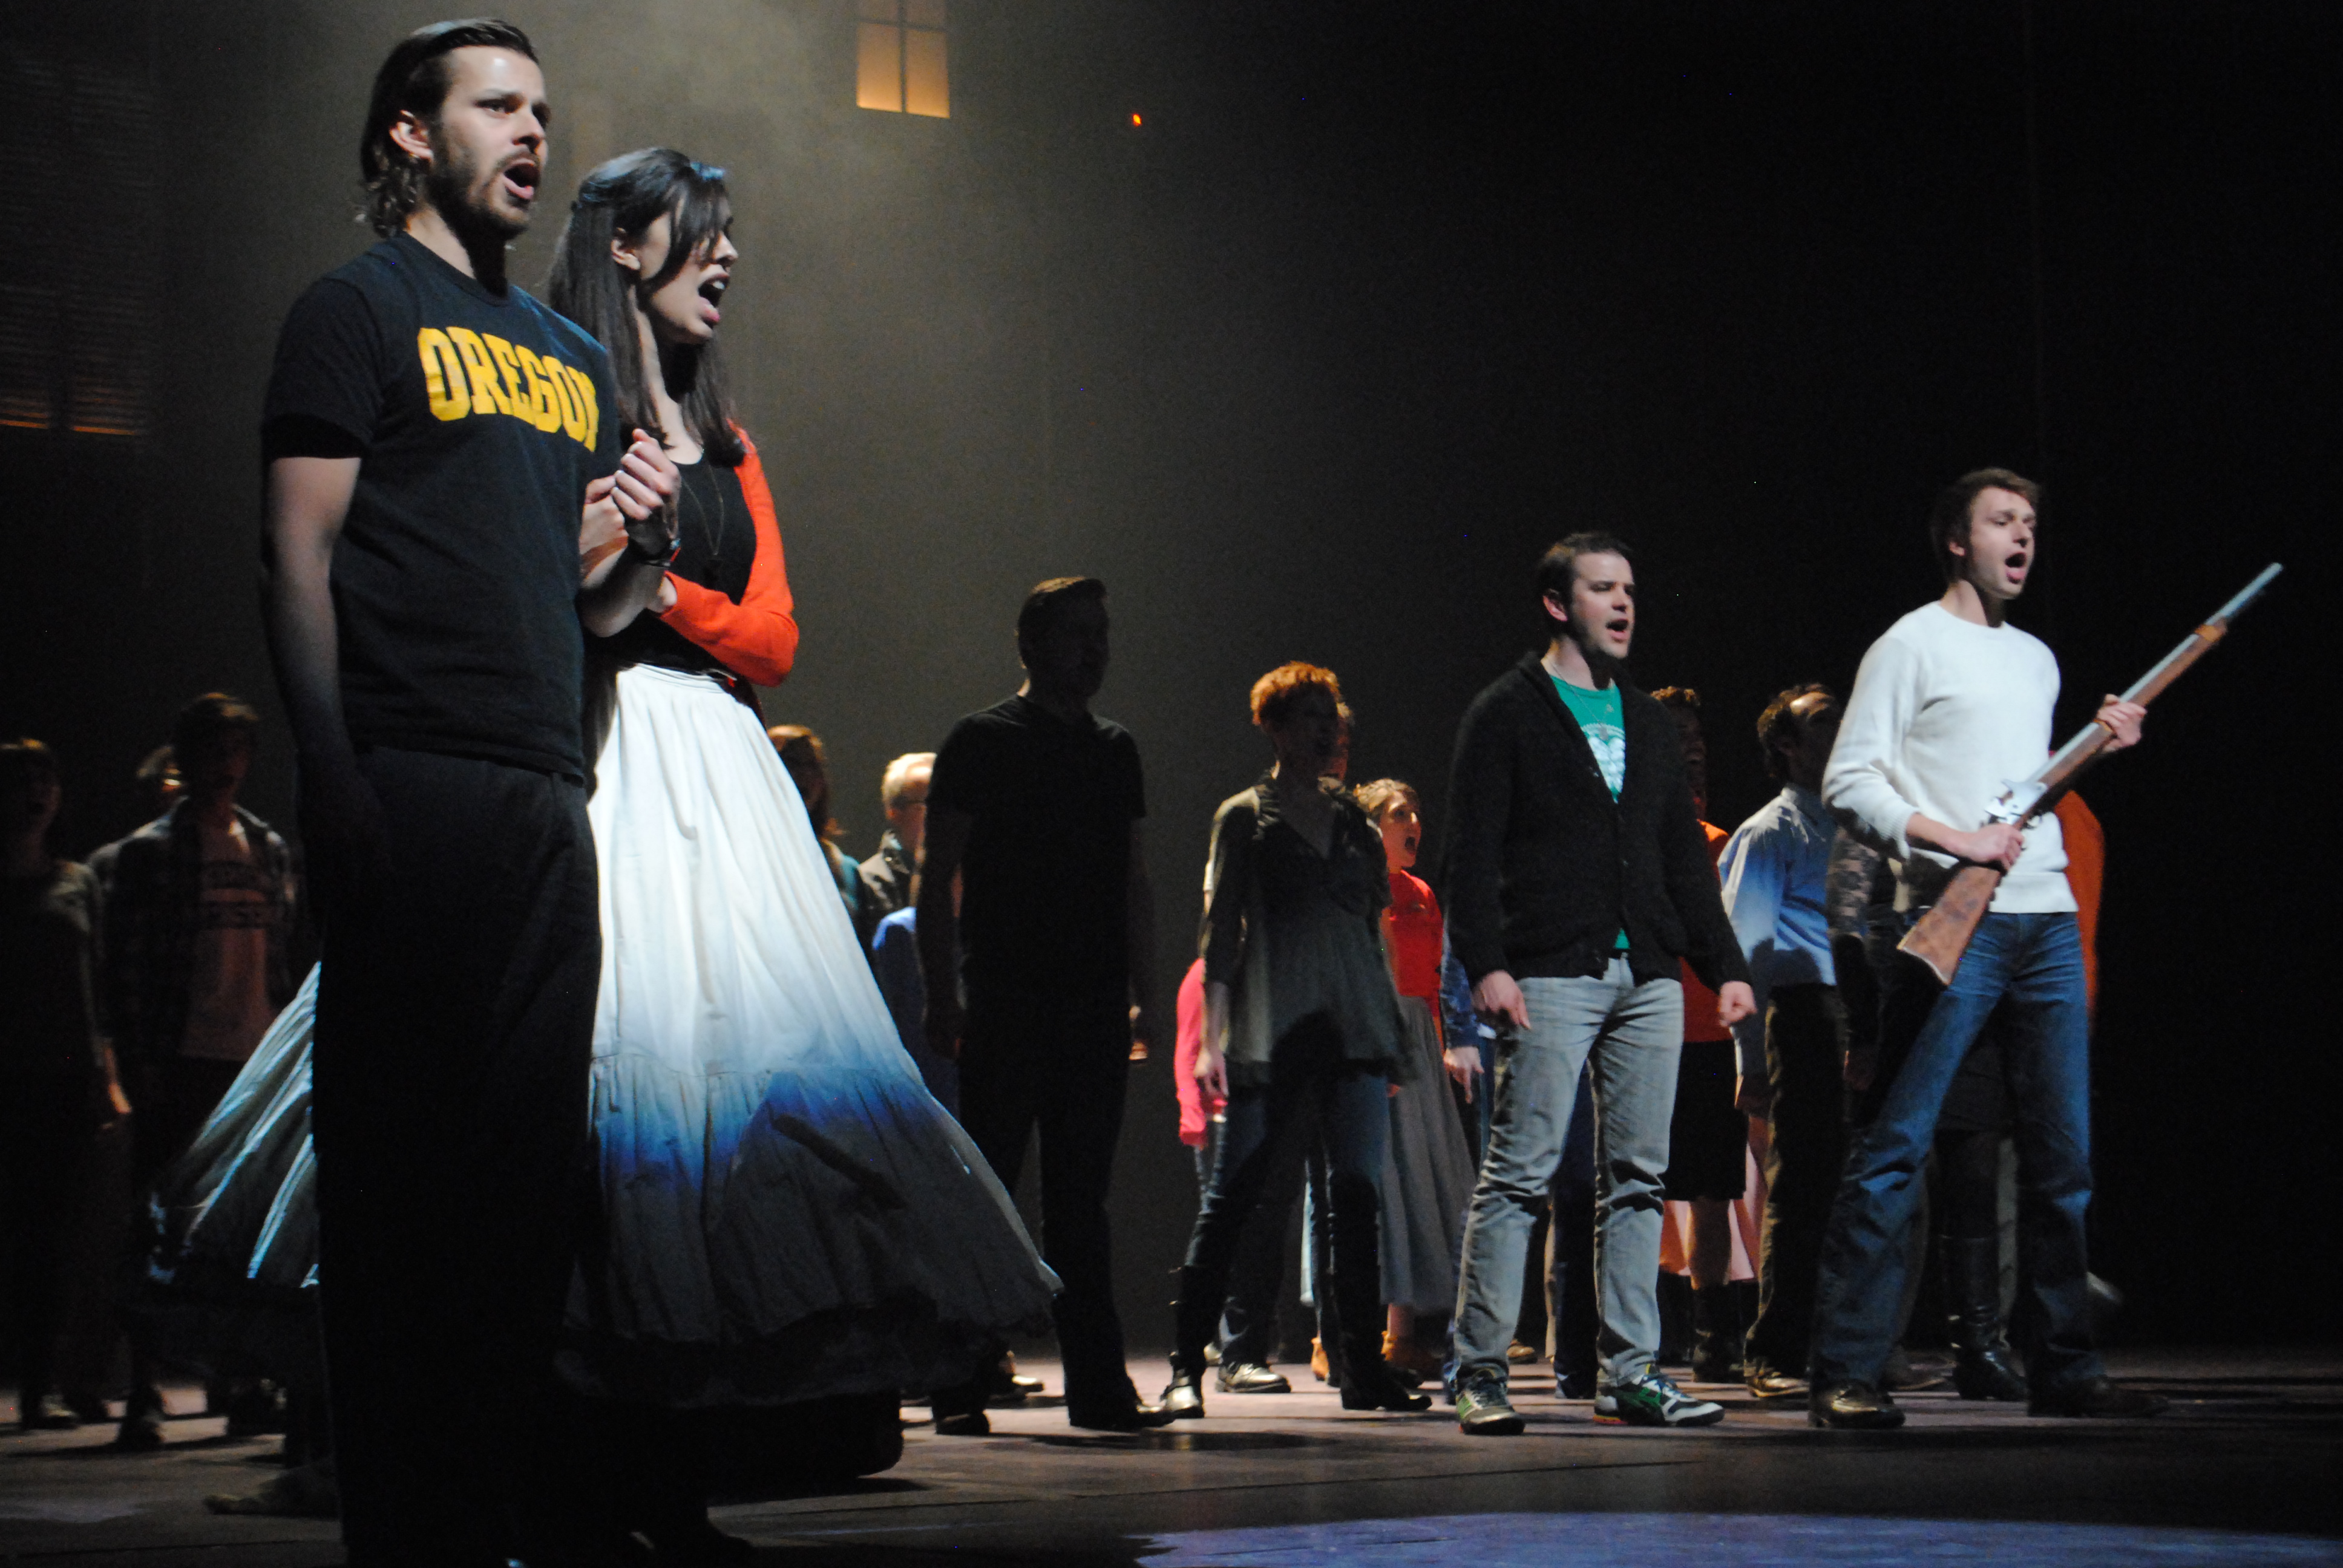 Civic Theatre actors rehearse for their performance of “Les Miserables.” (Staff photo)